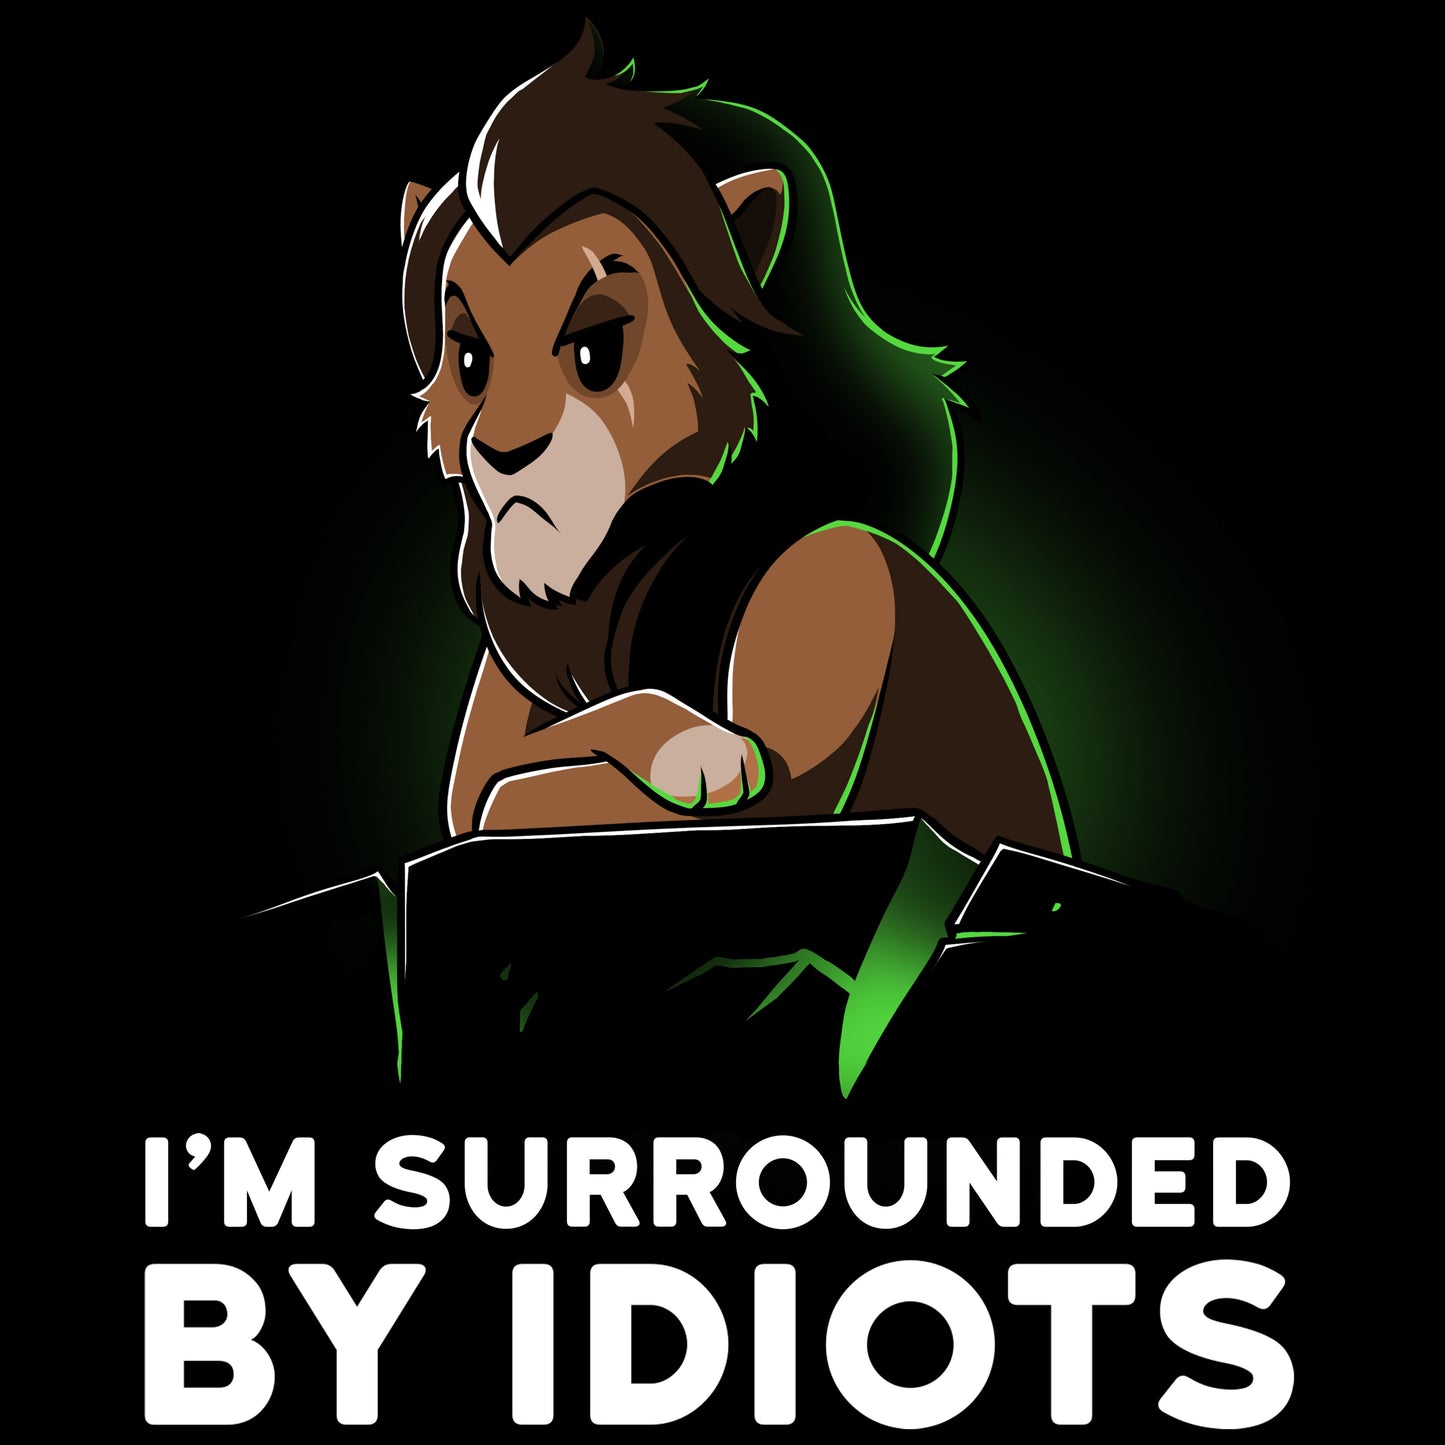 I'm surrounded by Disney Officially Licensed Lion King T-shirt wearers of the product "I'm Surrounded By Idiots" by the brand Disney.